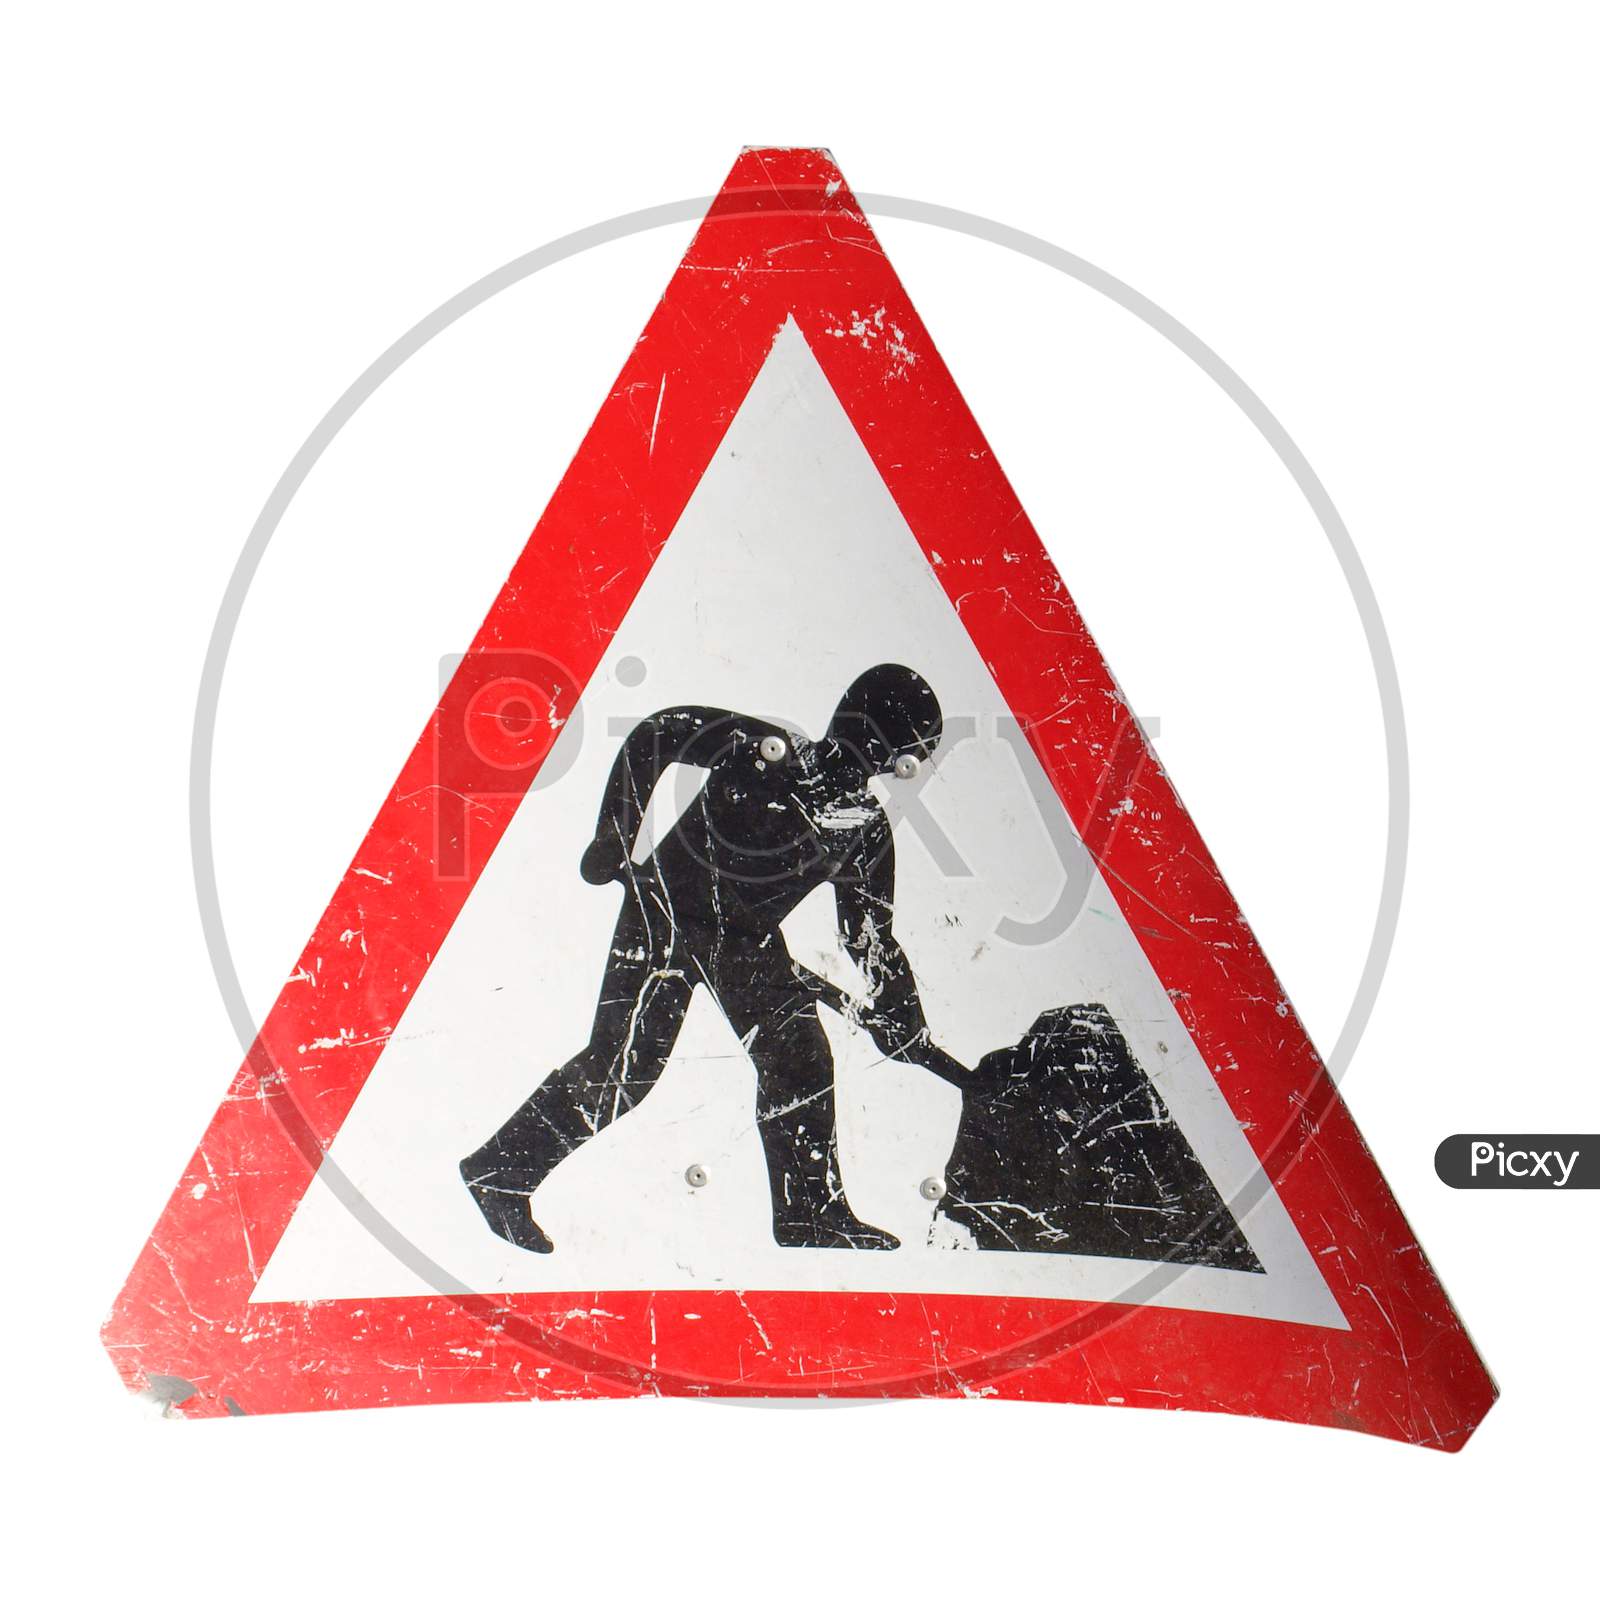 Road Work Sign